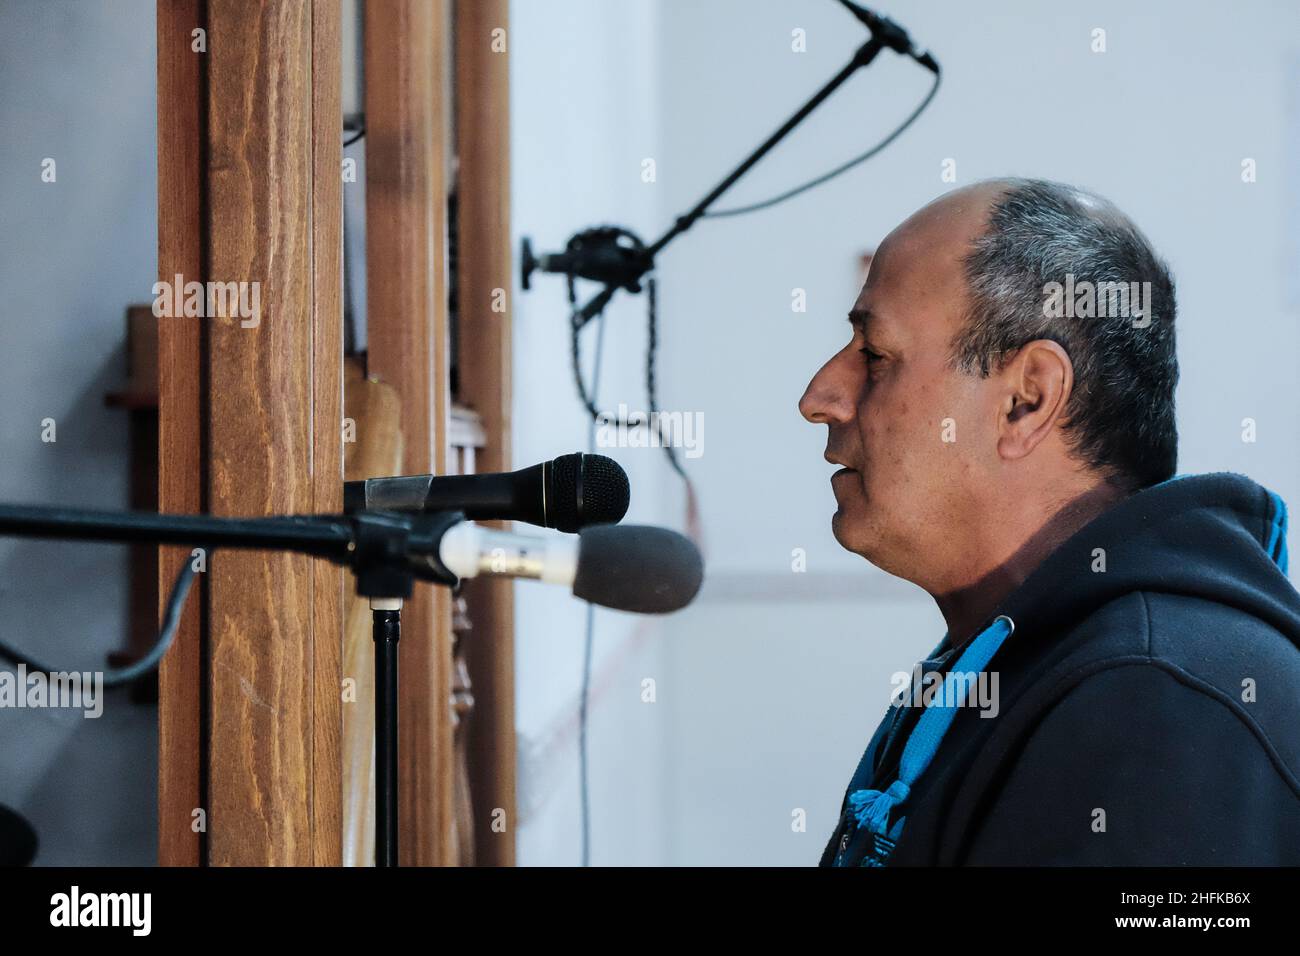 Jerusalem, Israel. 30th November, 2016. In this FILE PHOTO dated 30th November, 2016, TAWFIK ELAYAN, Muazzin of the Al Rahman mosque in the village of Bet Safafa, performs the AlAzzan, call to prayer, through a sound amplification system. The Jerusalem Municipality has filed for a court order to demolish new golden dome, a Haram Al Sharif Temple Mount mockup, atop the Al Rahman Mosque in Jerusalem's Beit Safafa neighborhood. The municipality based its request claiming new top floor and dome were built without permits nor inspection of municipal engineers and are a threat to public safety. Cred Stock Photo